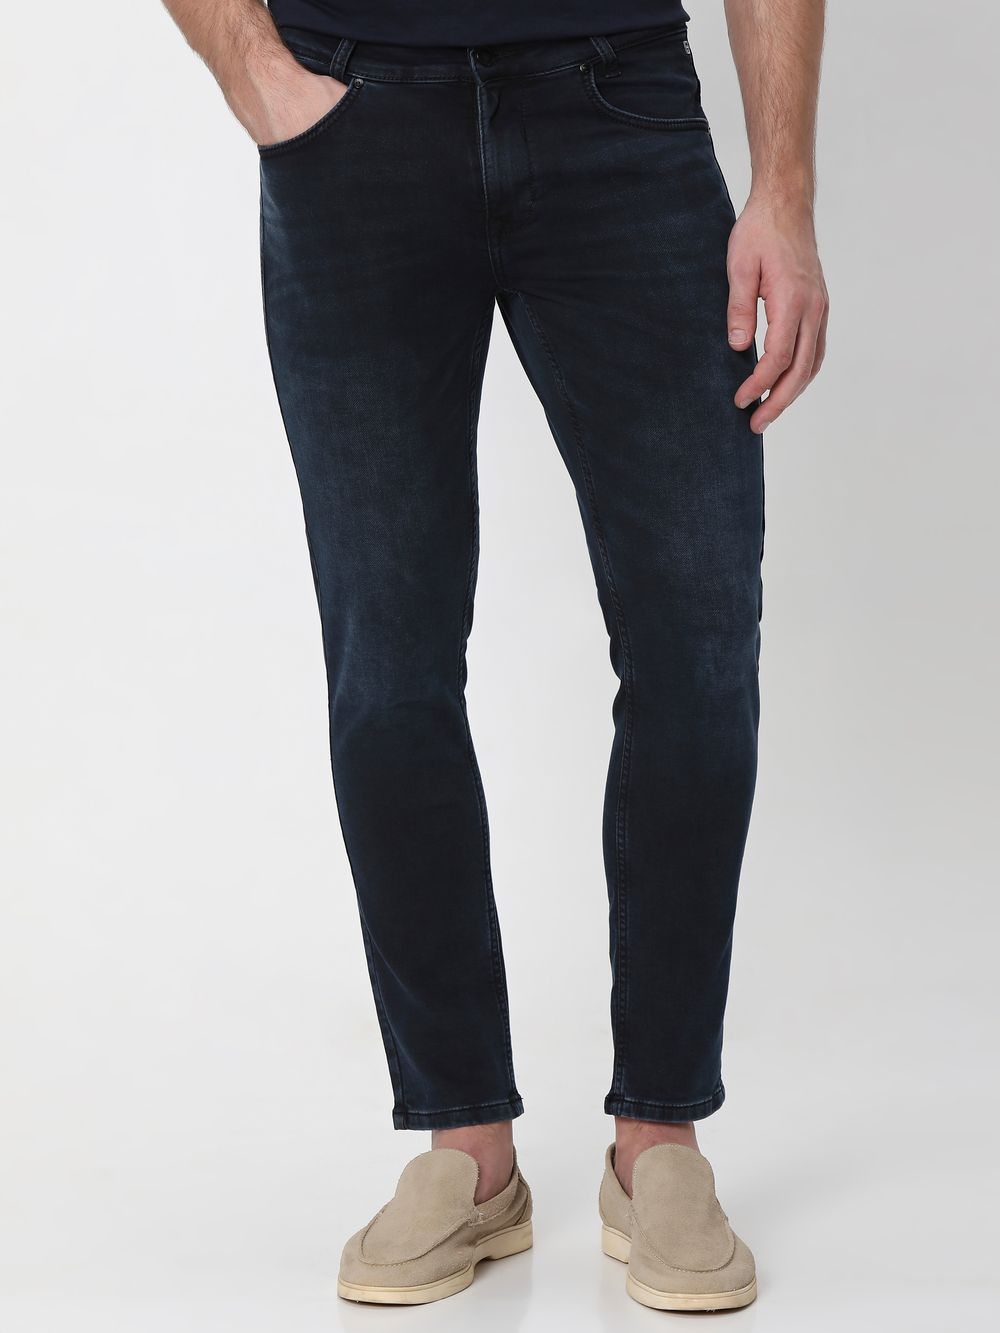 Charcoal Ankle Length Fly Weight Jeans